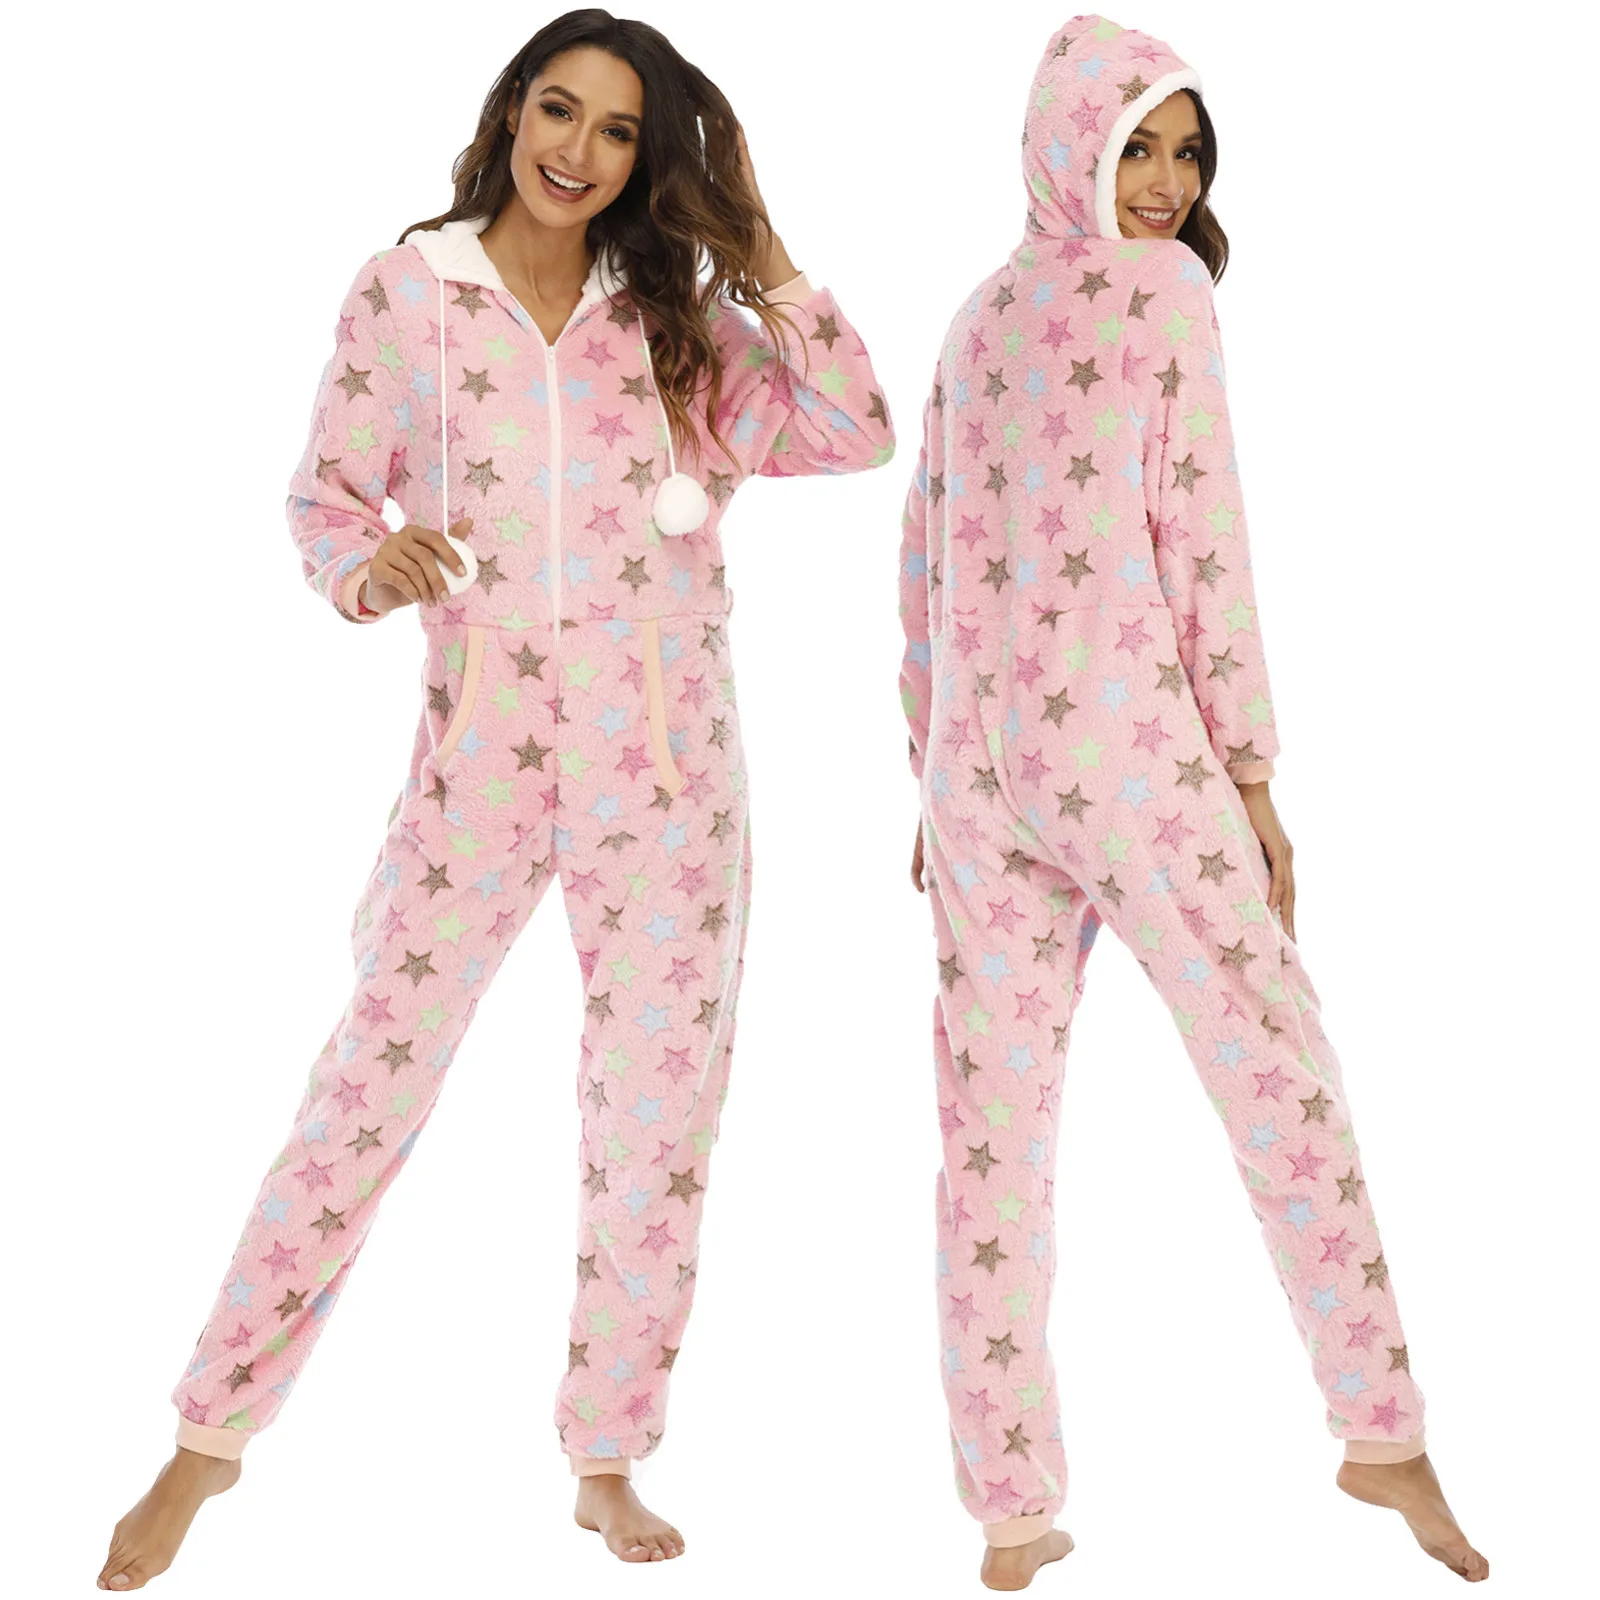 

Cute Plush Print Onesie Pajamas Women’S Hooded Zipper Jumpsuit Thick Comfortable Warm Loungewear Adult Sexy Lingerie Nightgown